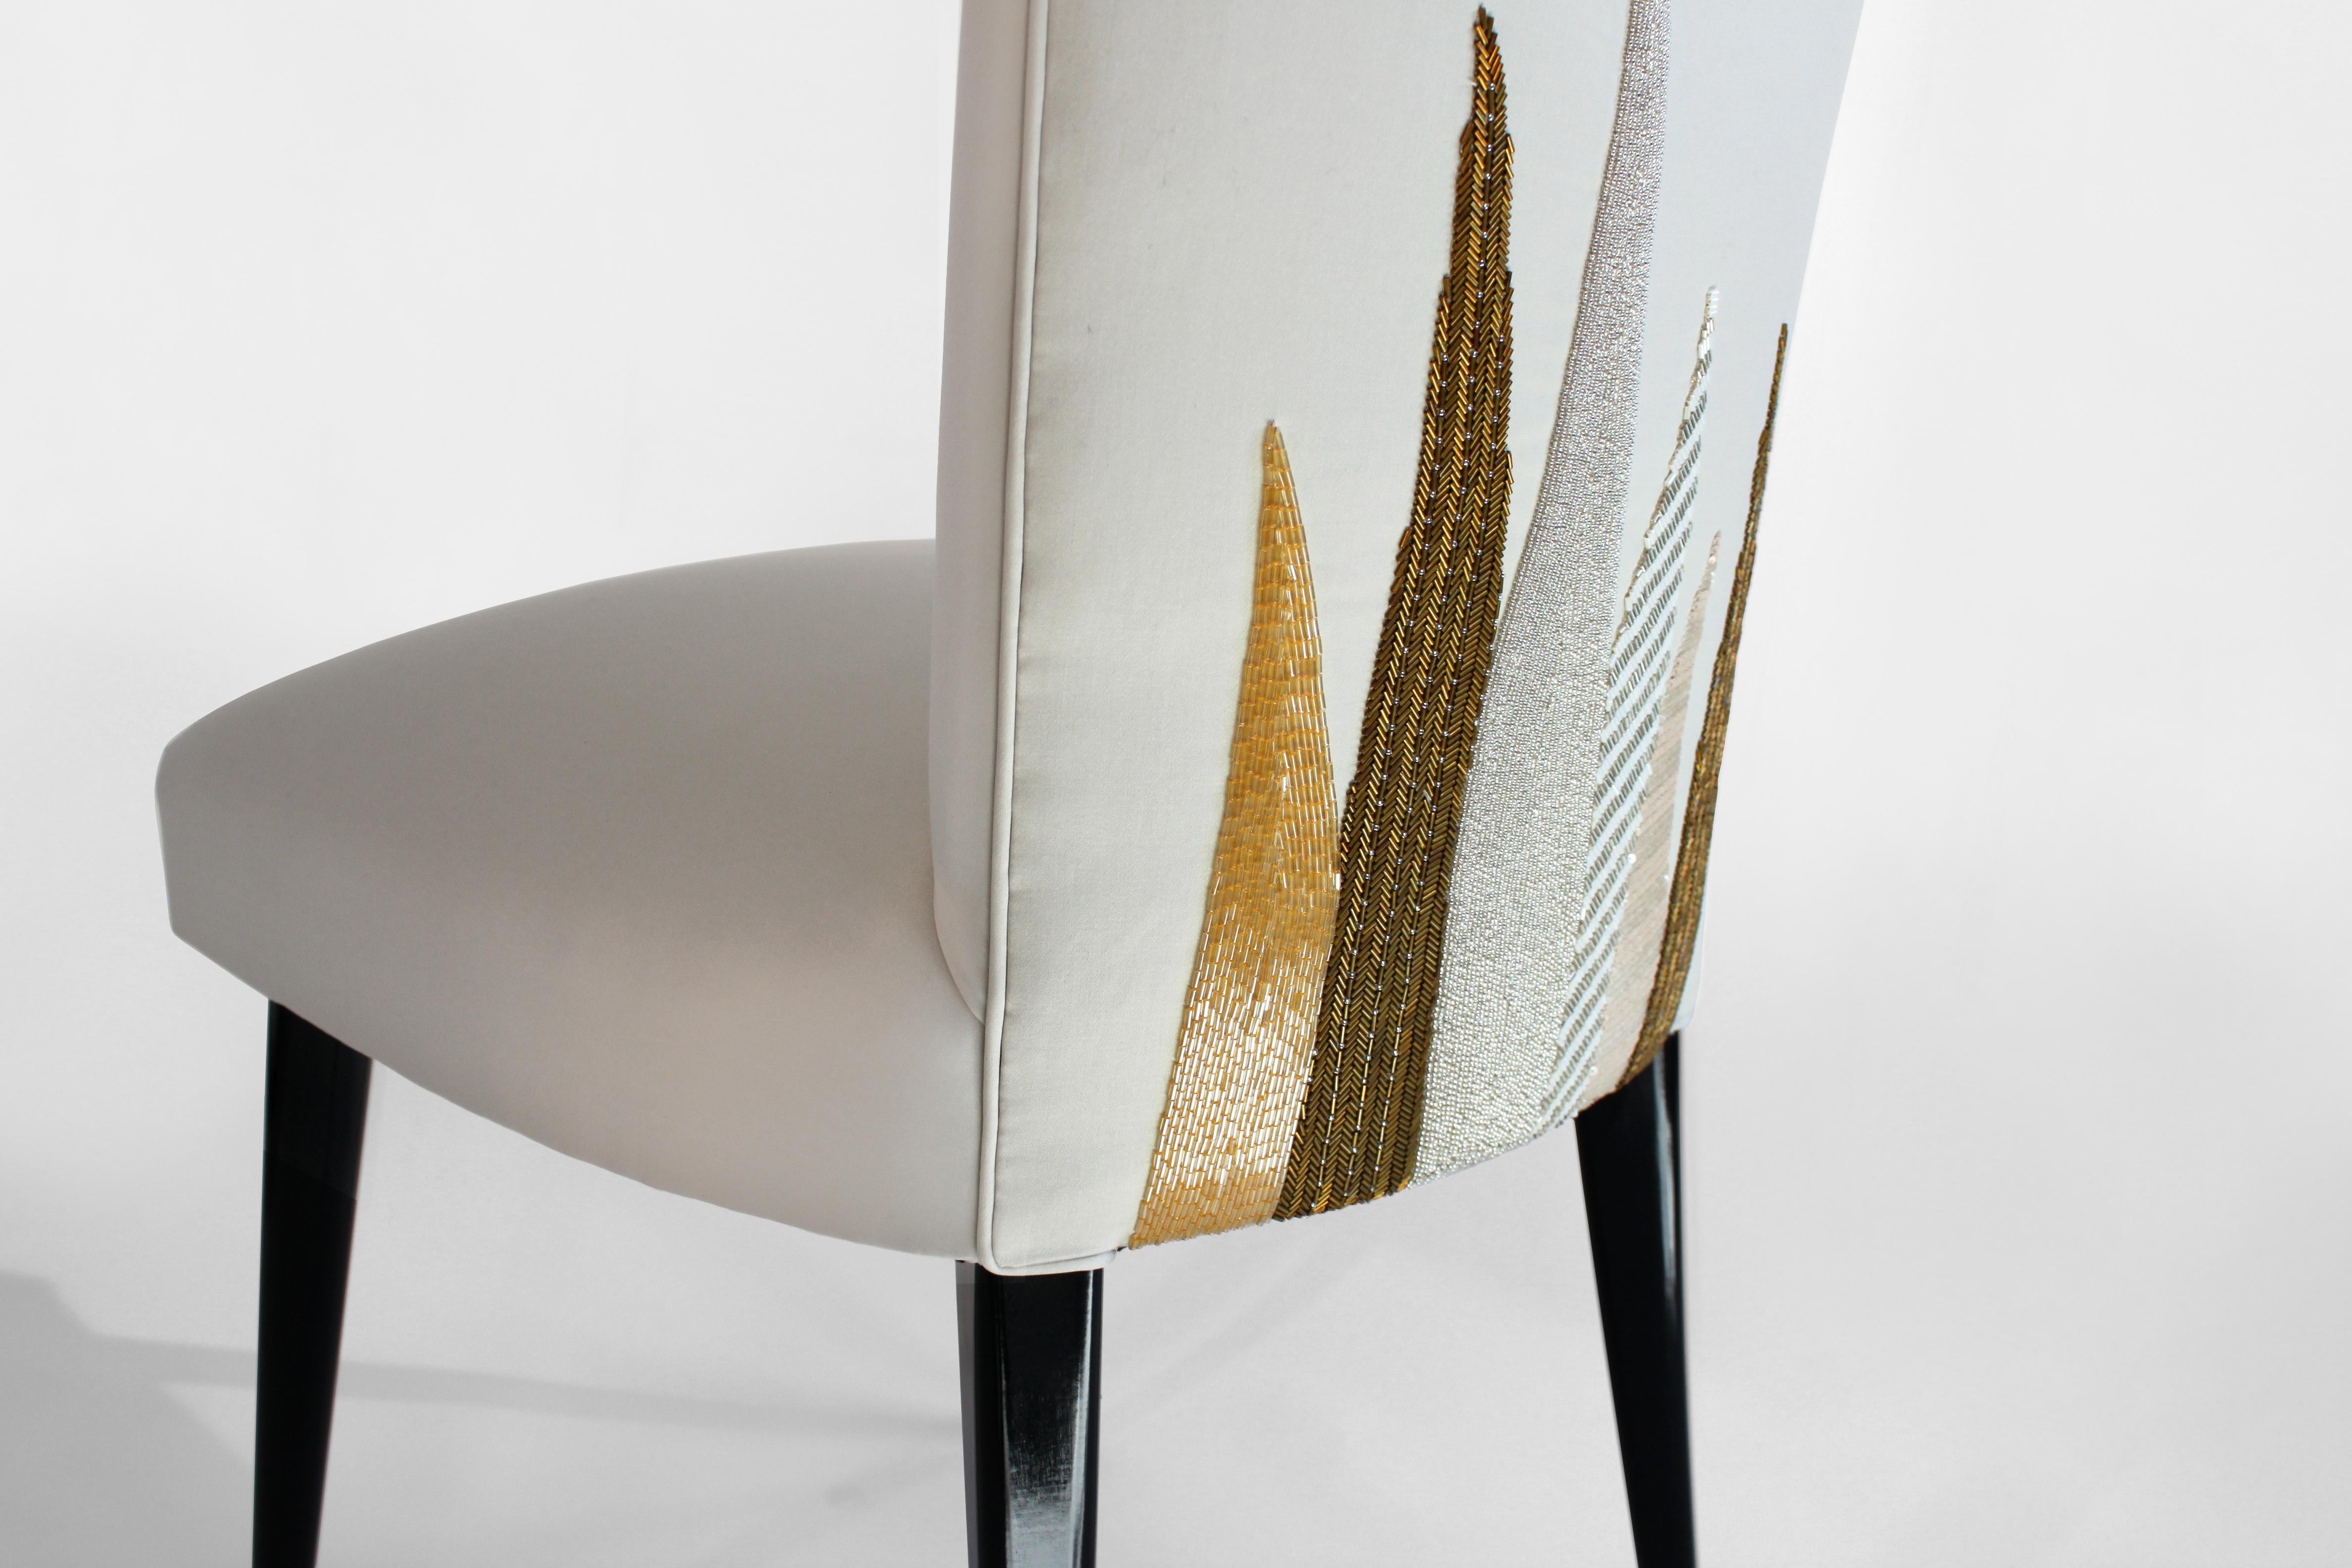 Inspired by a vintage Italian silhouette from the 1950s, this elegant slipper chair is designed and individually upholstered in our London studio. Hand beaded and embroidered in soft gold and bronze metallic hues. 

The chair frame is constructed